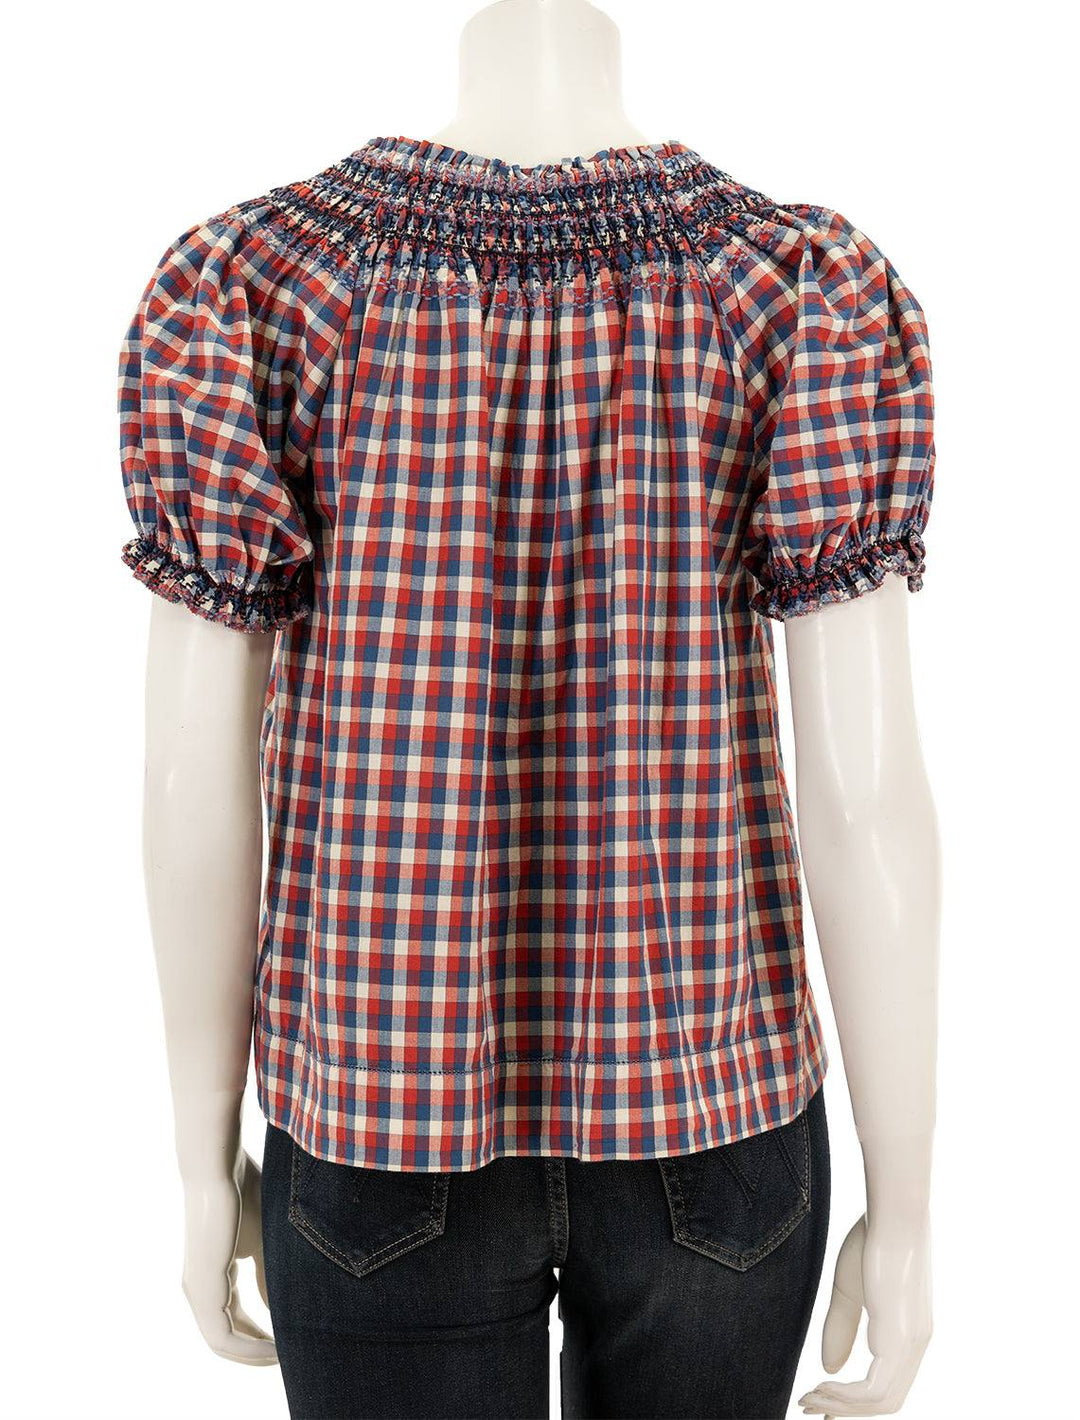 Back view of The Great's the fair top in picnic plaid.